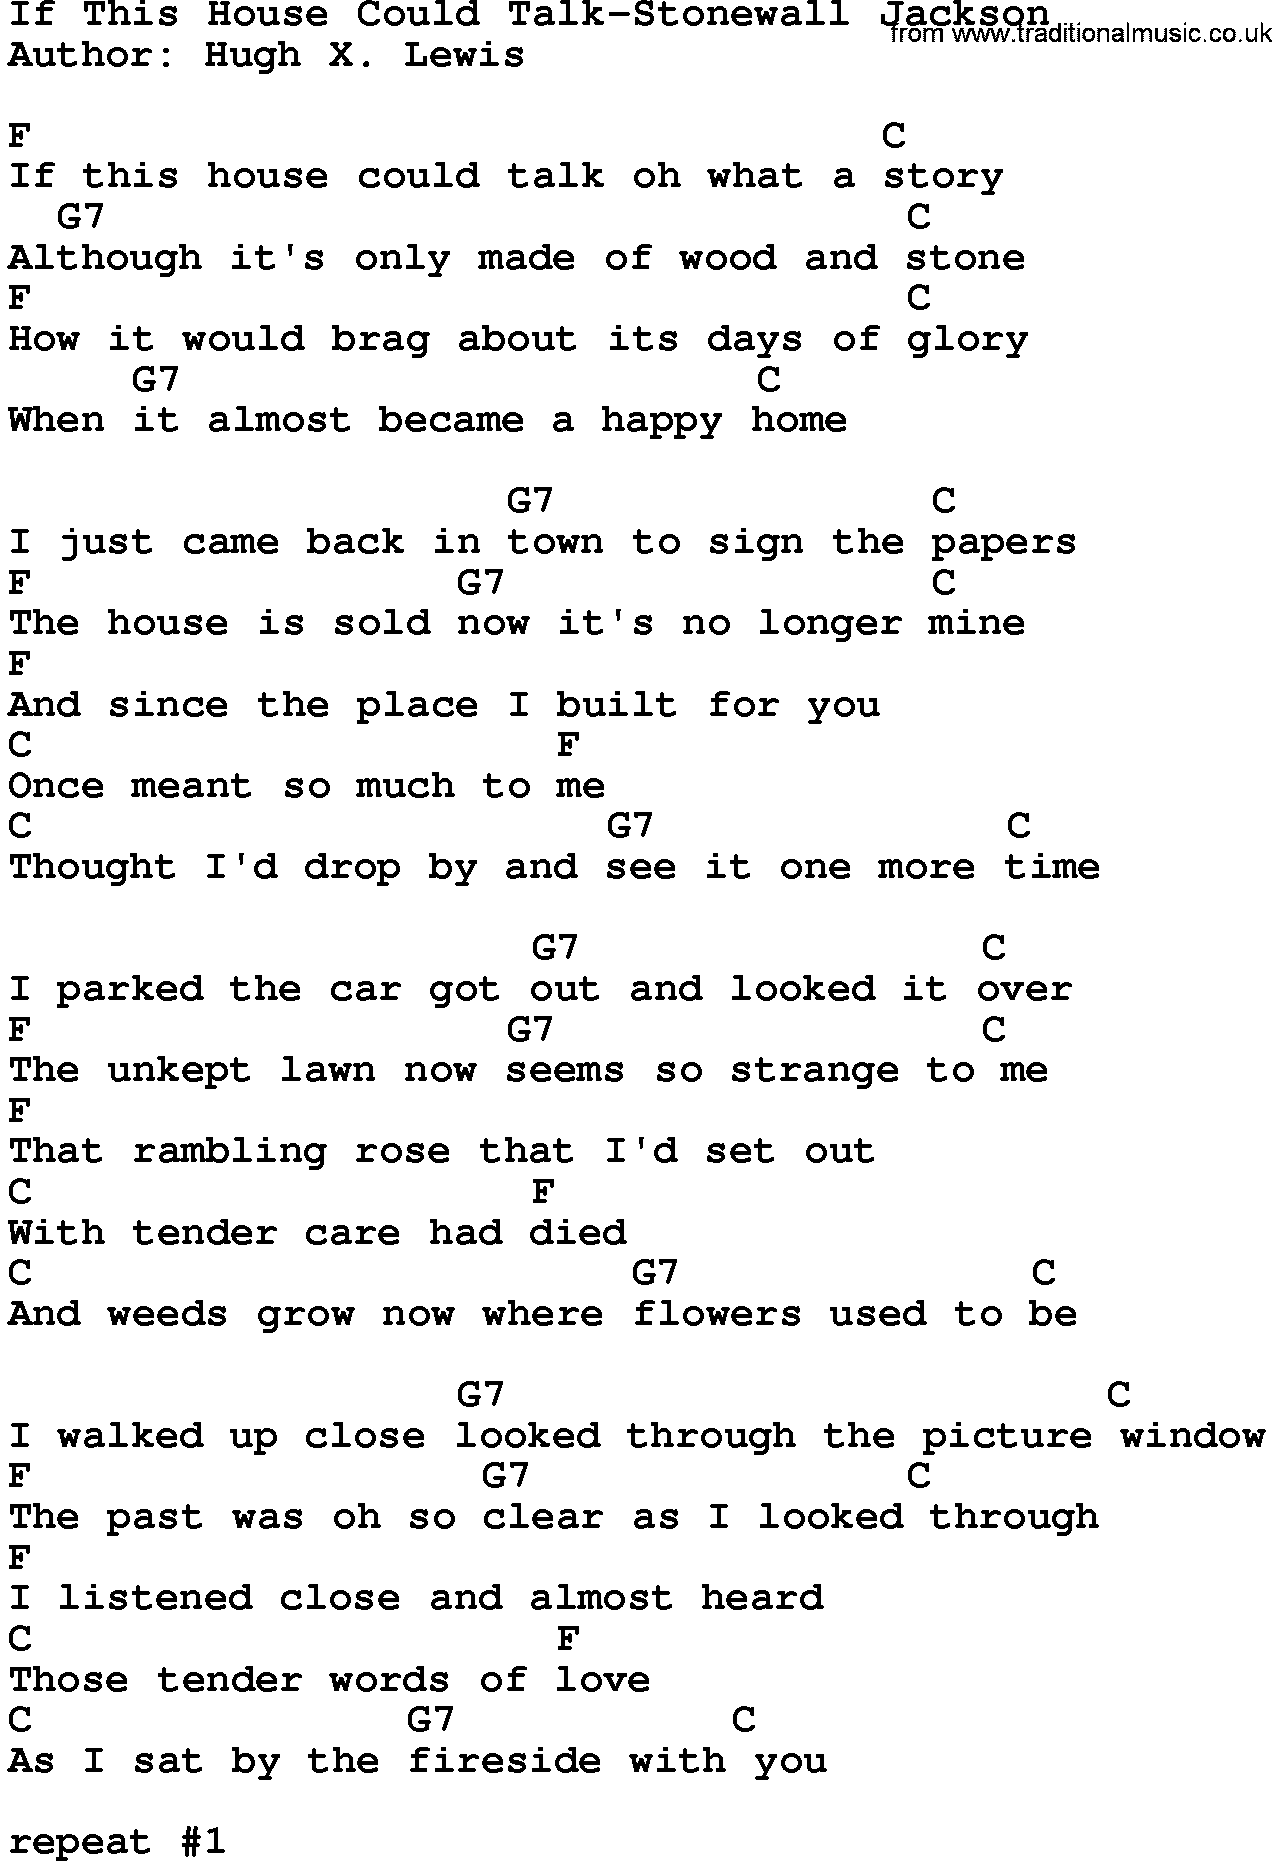 Country music song: If This House Could Talk-Stonewall Jackson lyrics and chords